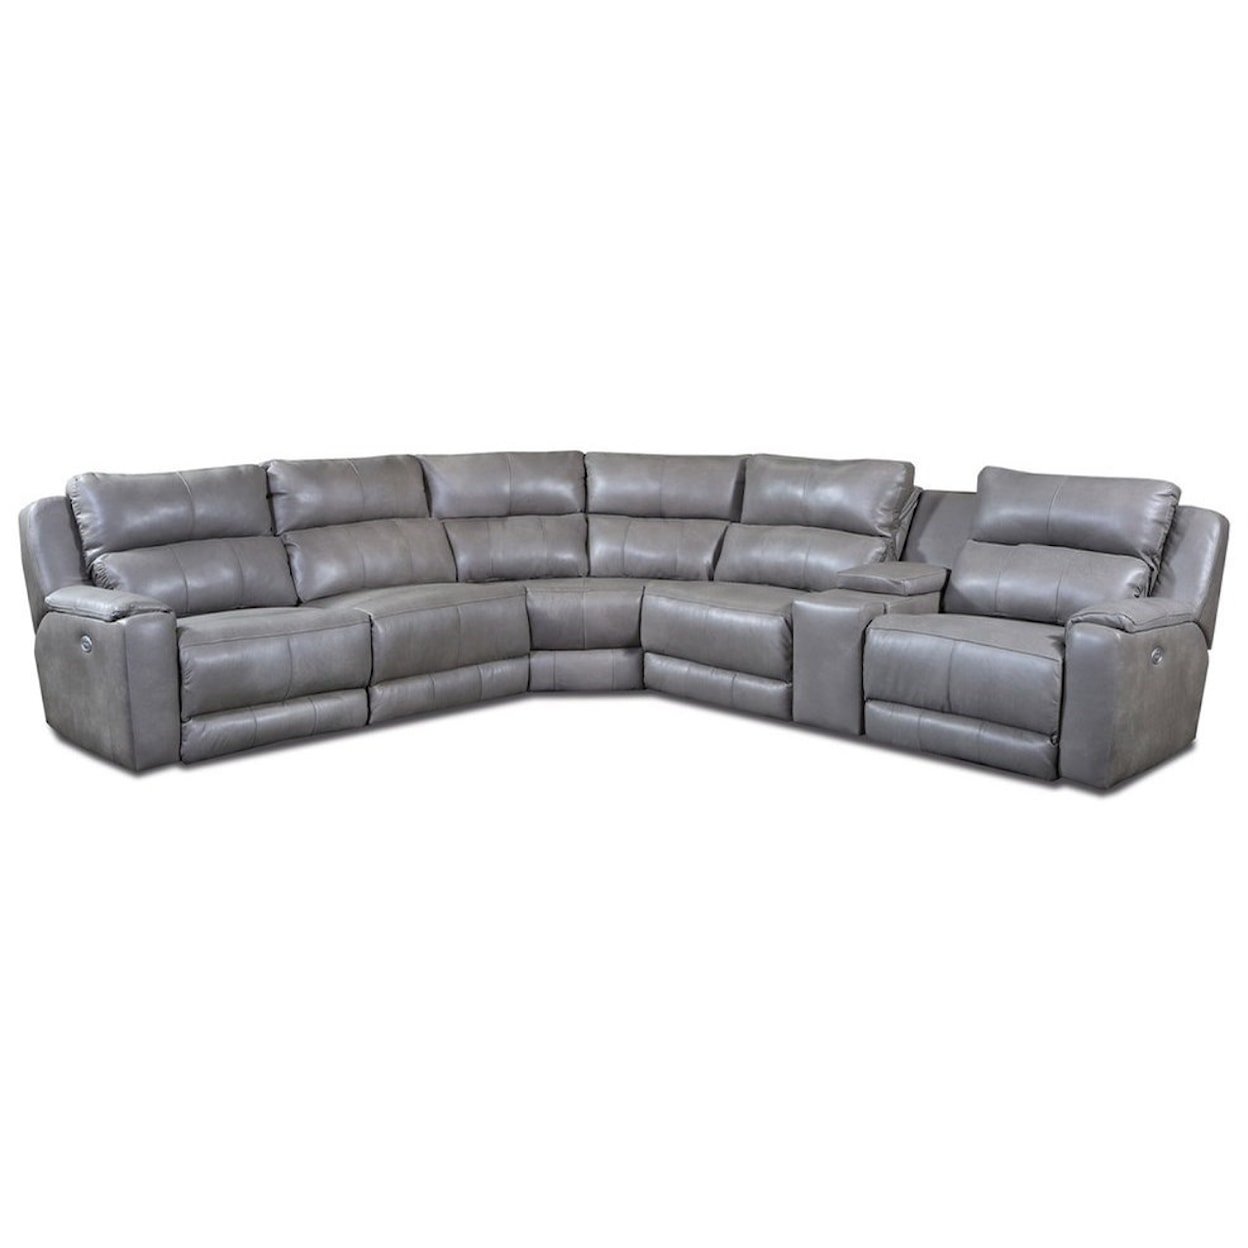 Southern Motion Dazzle Sectional w/ Cup Holders and Power Headrests